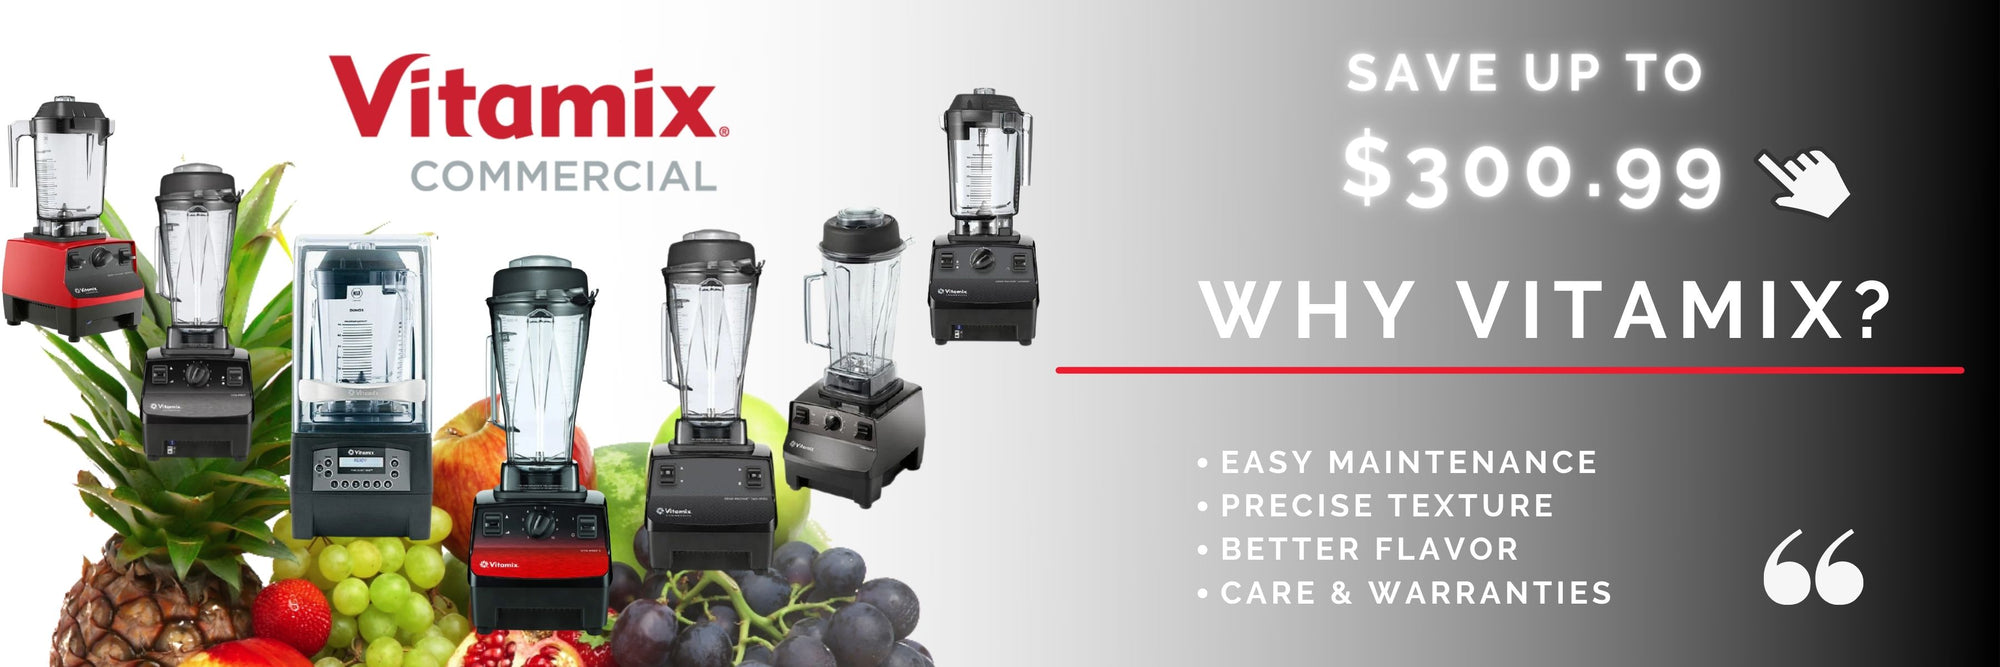 Vitamix Commercial Blenders | Kitchen Equipped